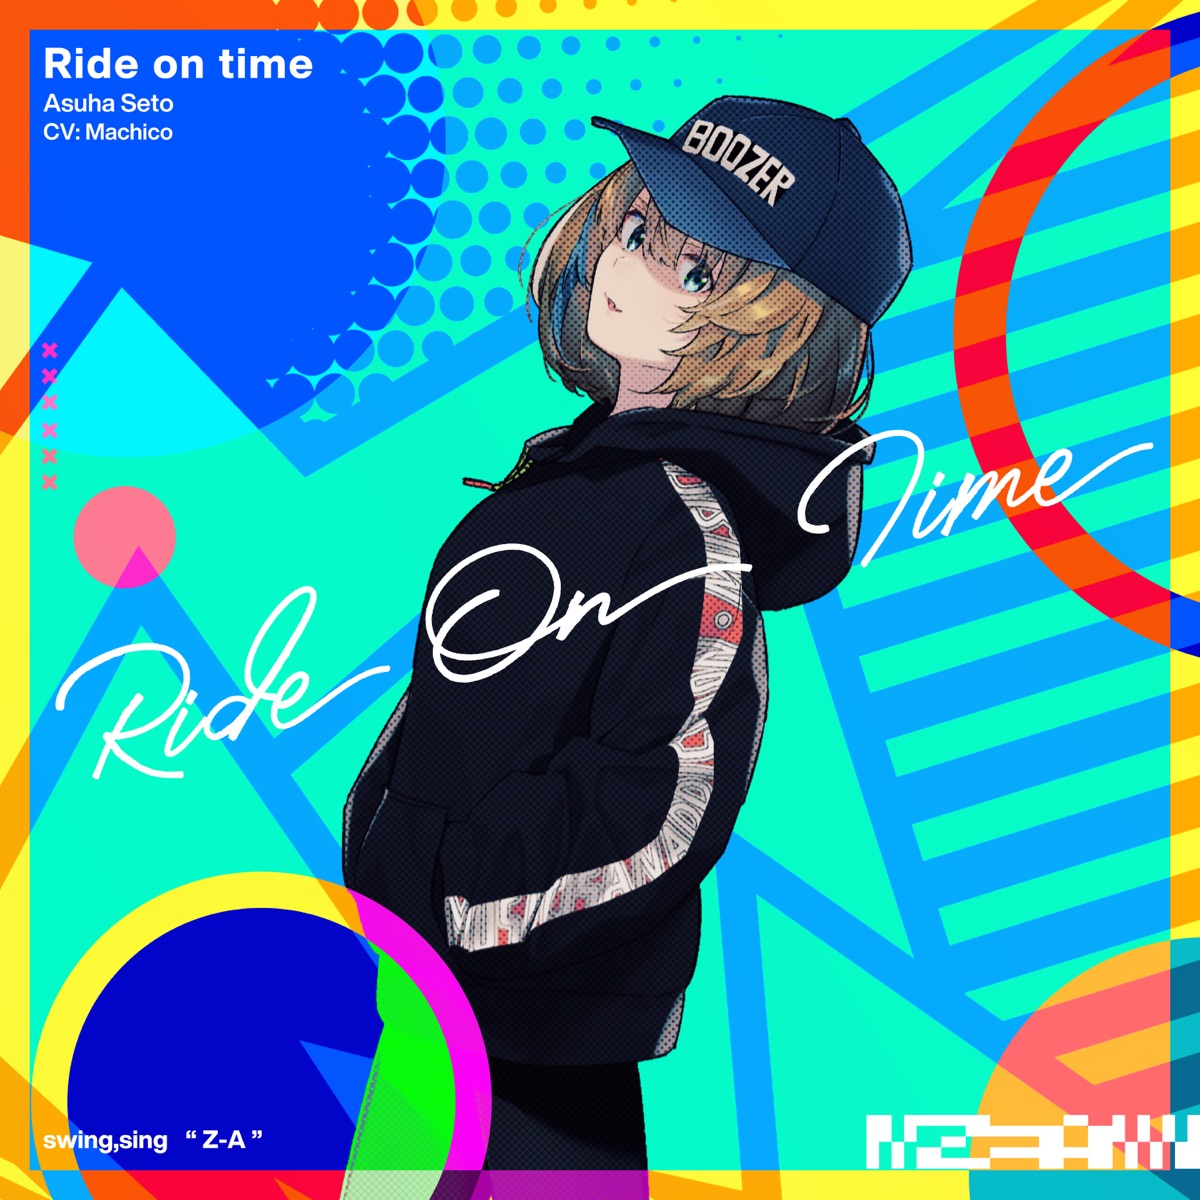 Cover art for『Asuha Seto (Machico) - Ride on time』from the release『Ride on time